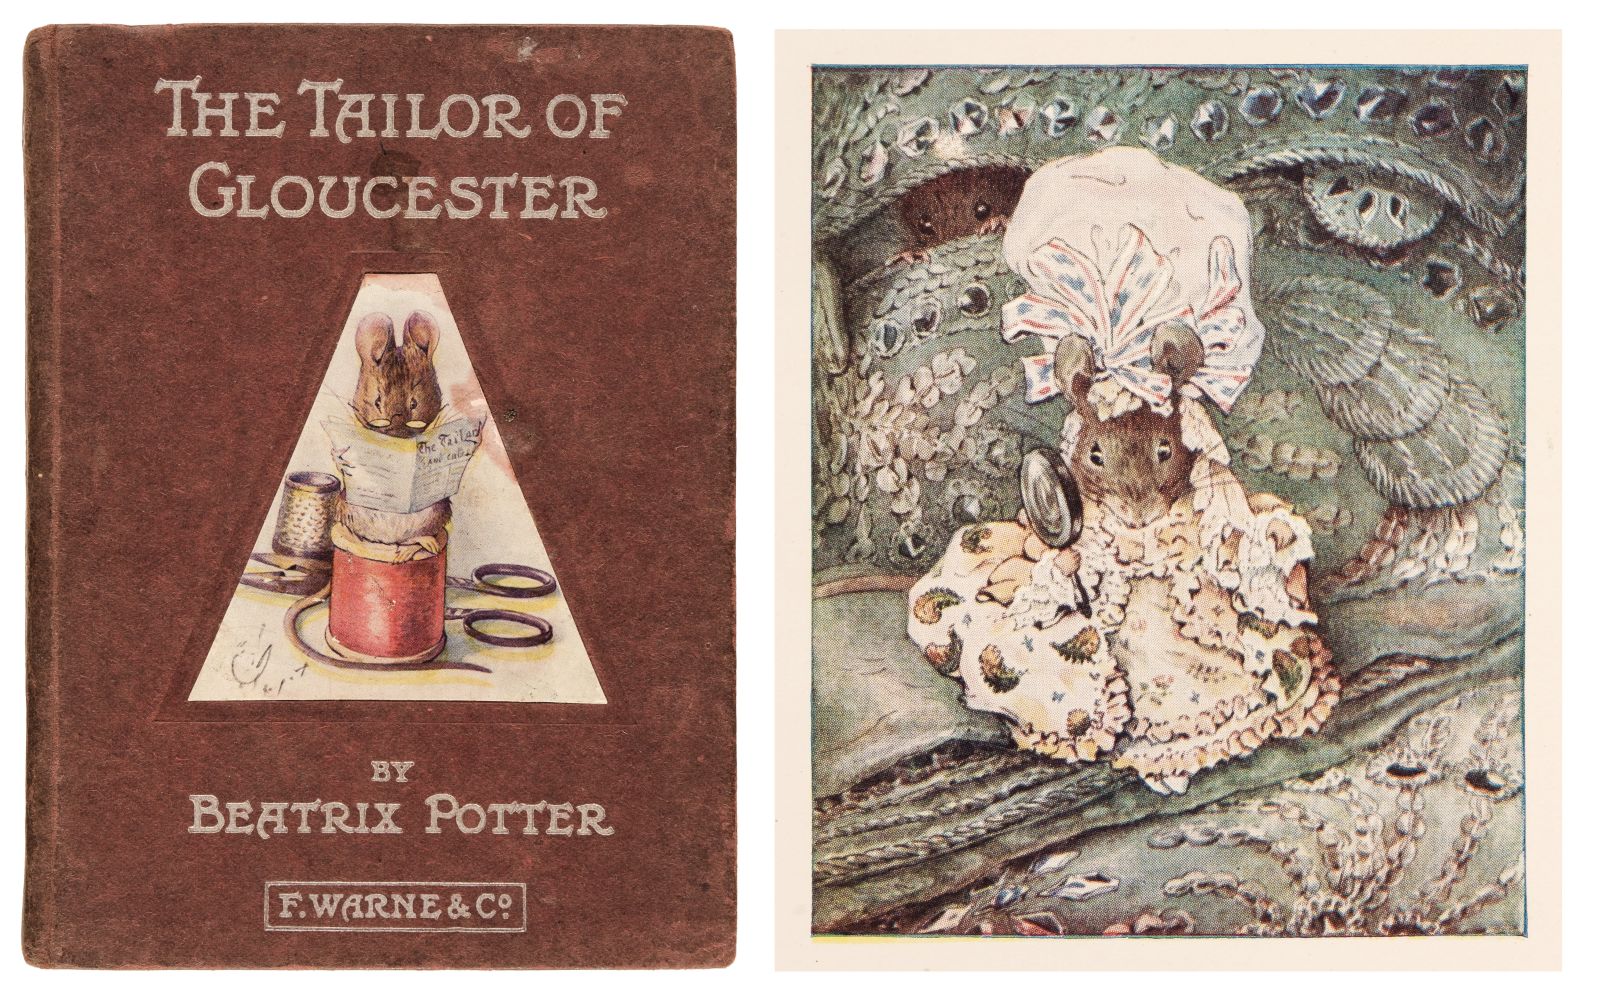 Potter (Beatrix). The Tailor of Gloucester, 1st edition, 2nd printing, 1903